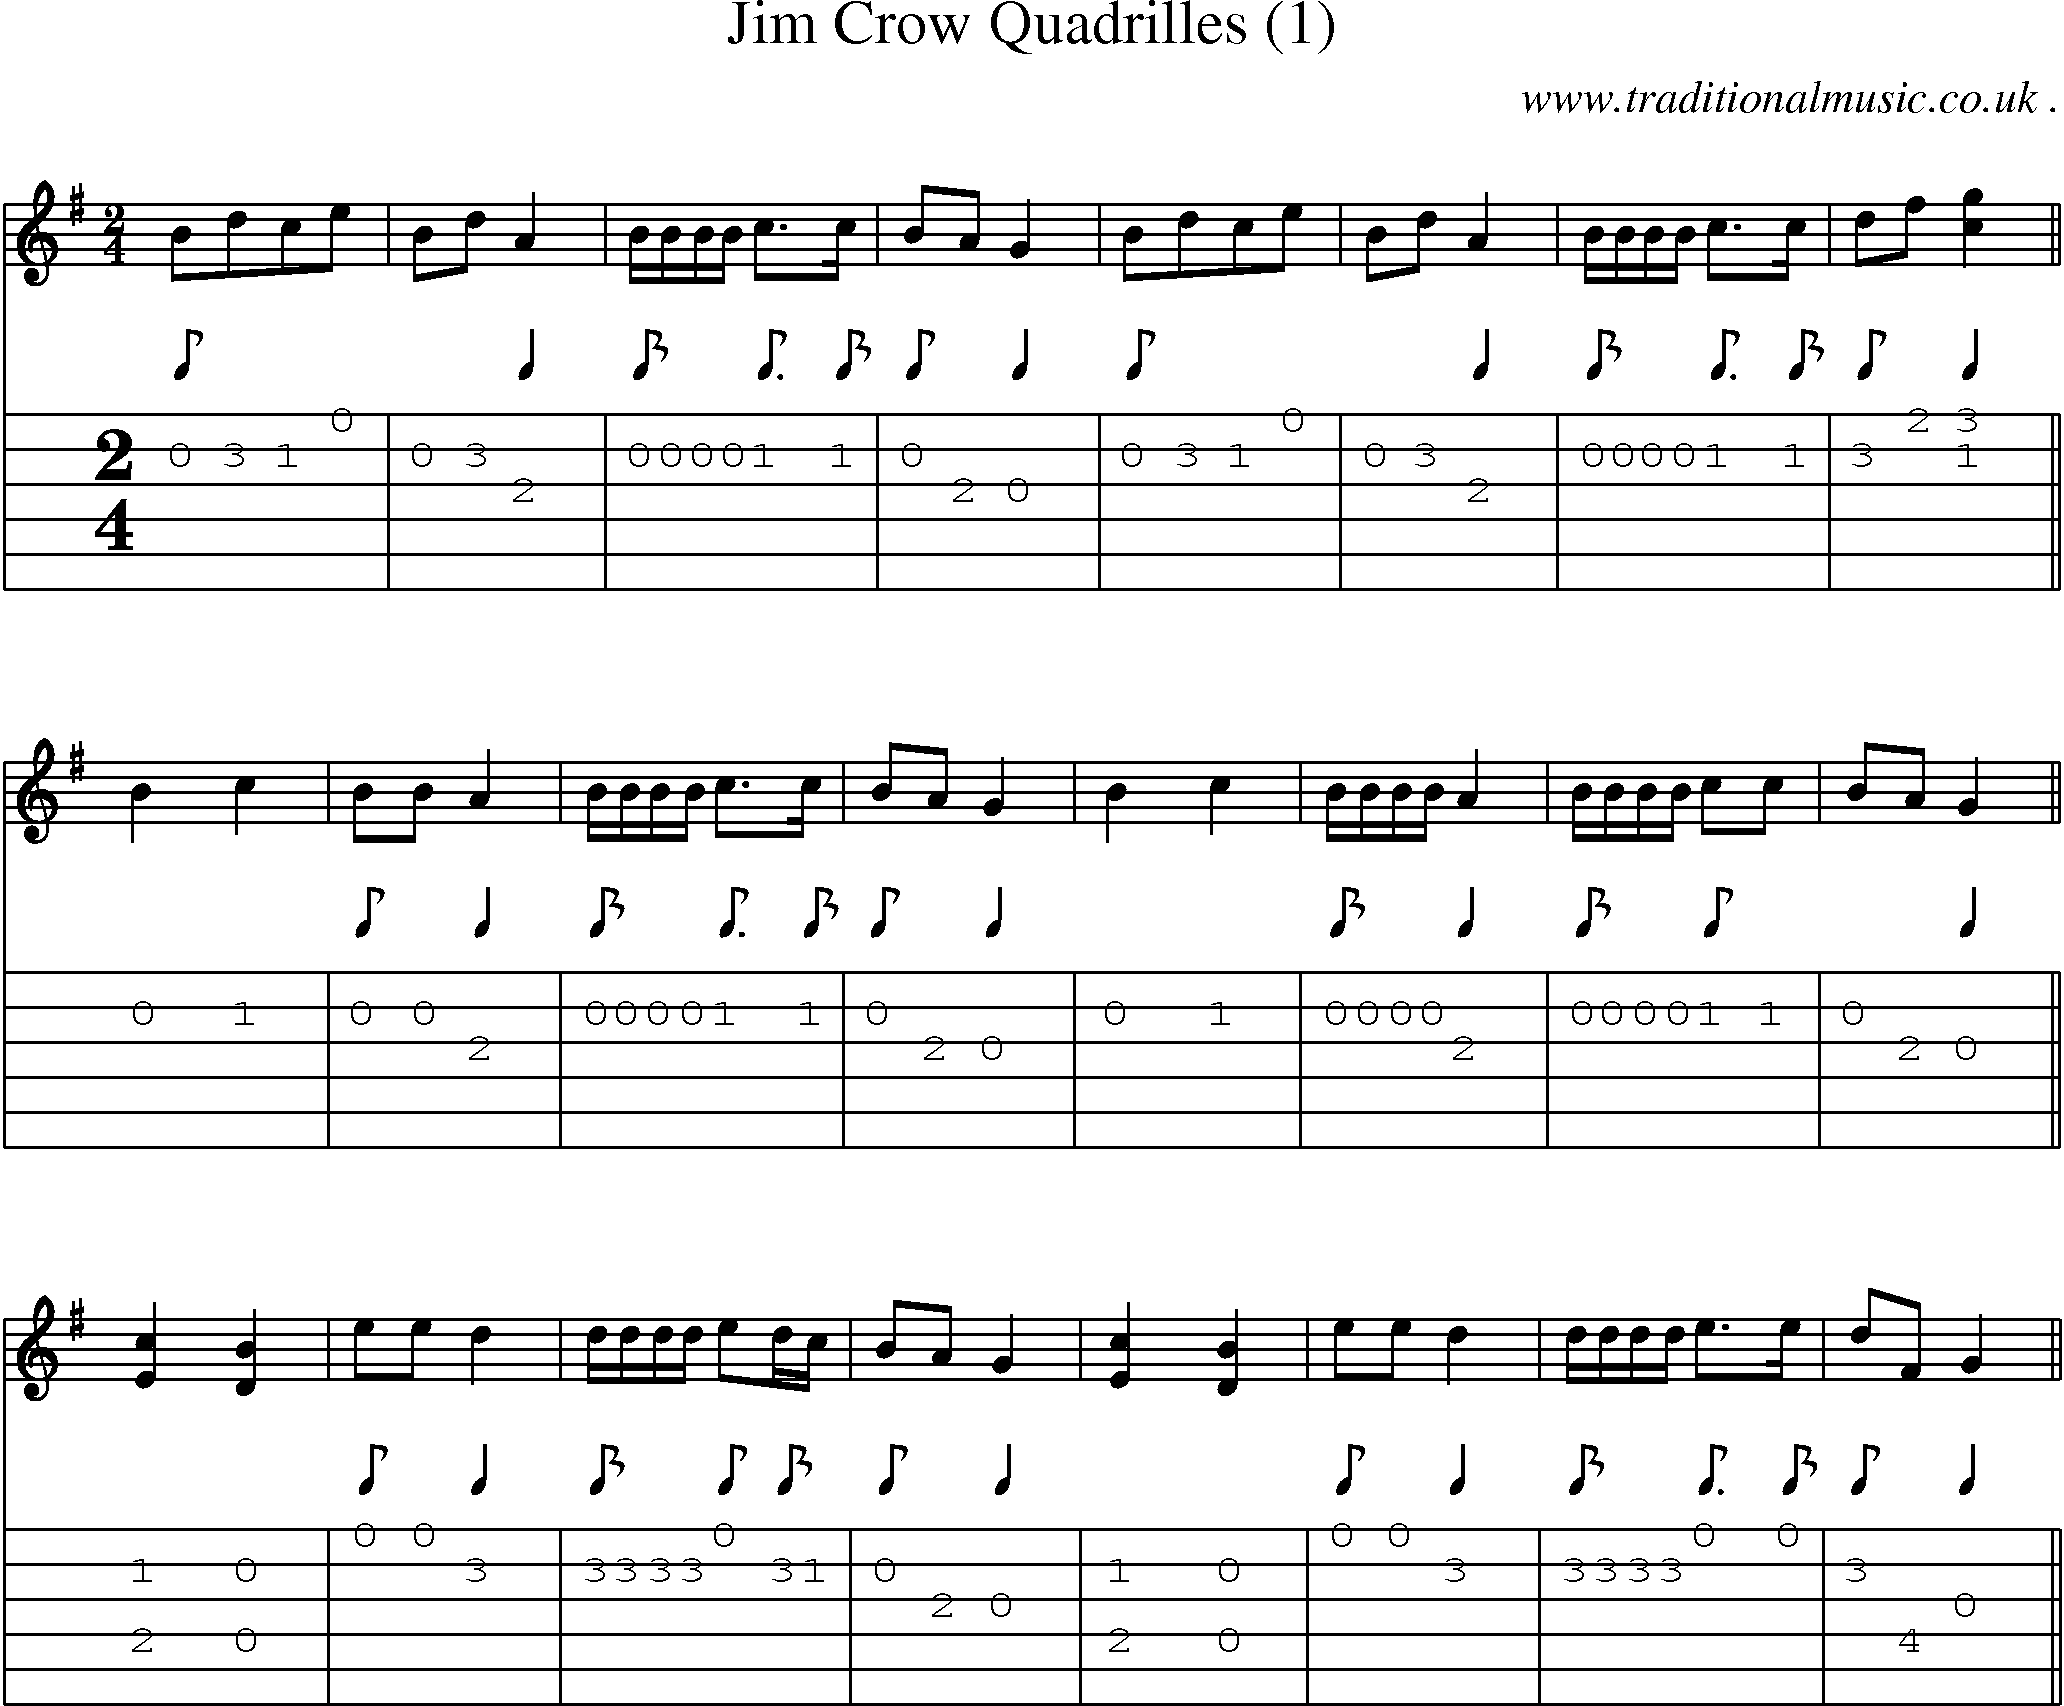 Sheet-Music and Guitar Tabs for Jim Crow Quadrilles (1)